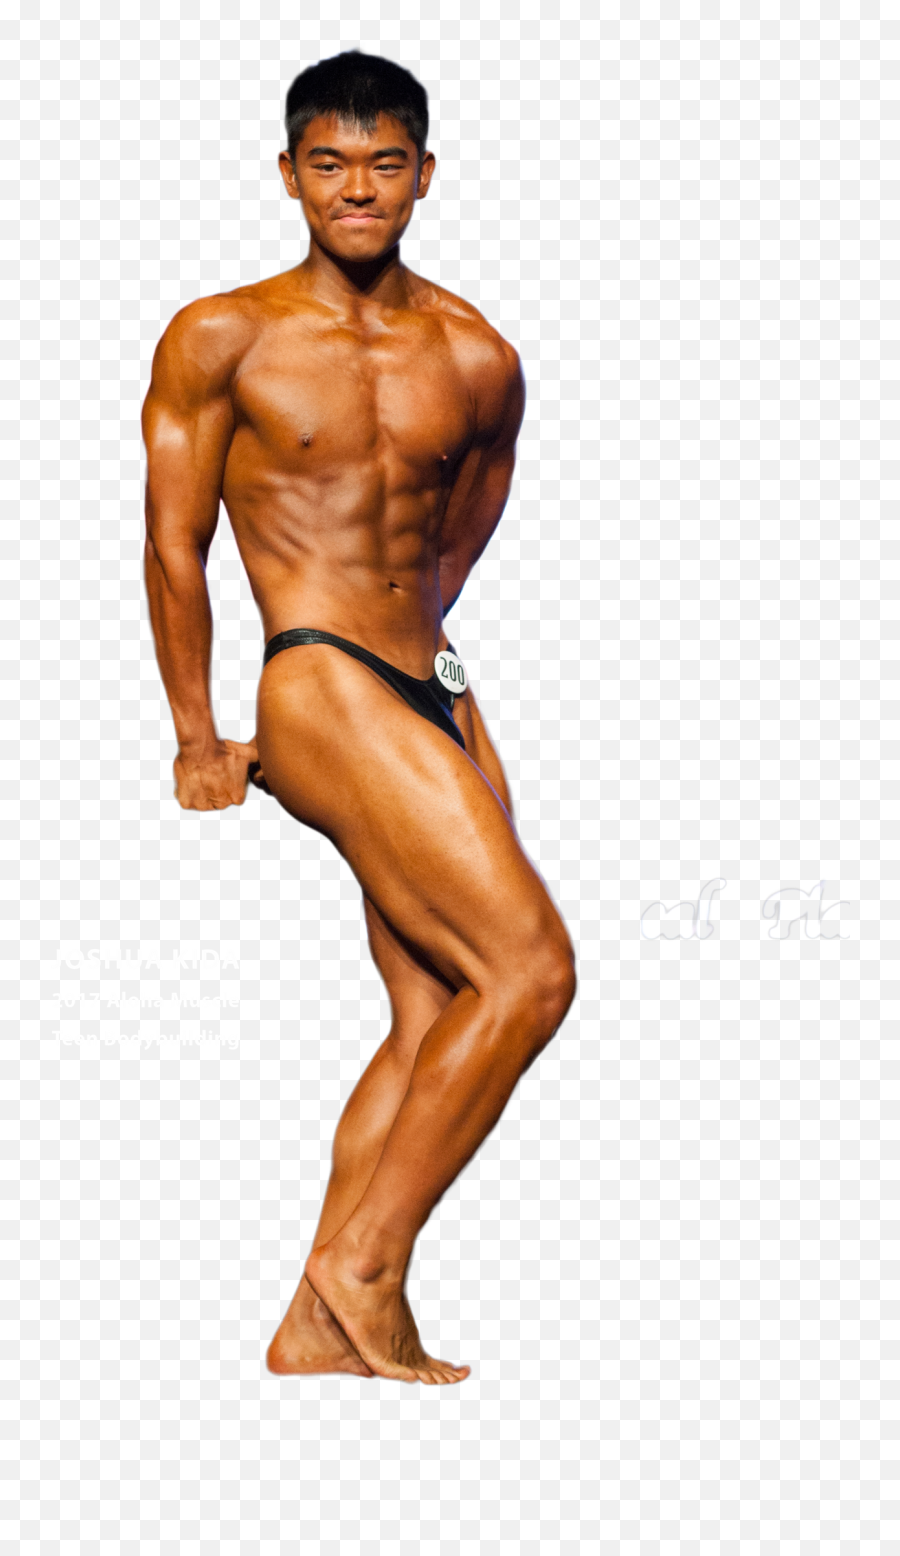 Body Builder Png - Bodybuilding Png Pic Full Bodybuilder Transparent Male Body Png,Bodybuilder Png